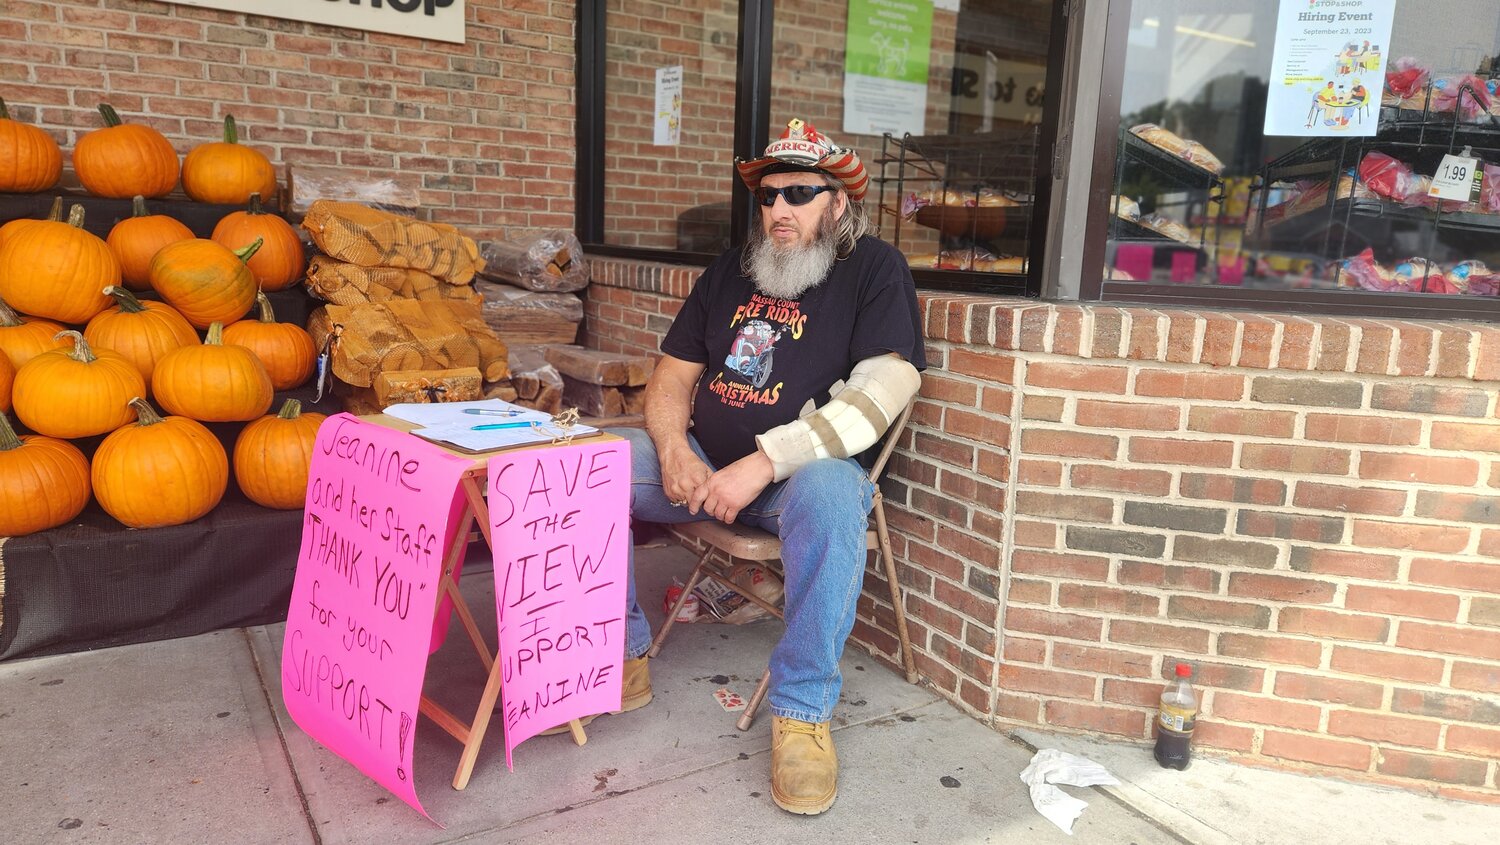 Tim Dunn sat outside the Stop & Shop on Forest Avenue for seven hours, surrounded by large neon-pink signs reading ‘Save the View.’